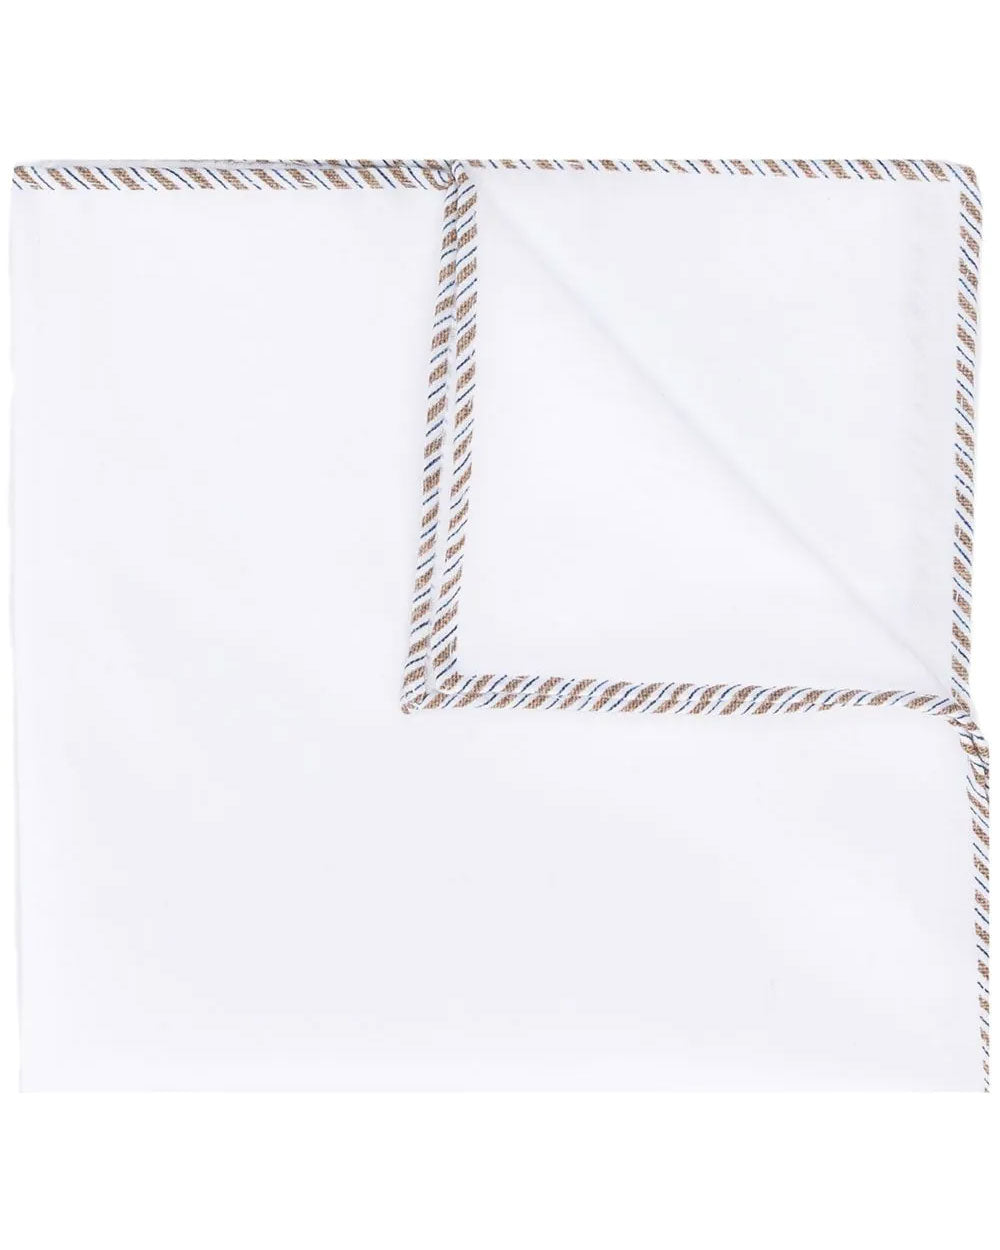 White and Brown Trim Pocket Square